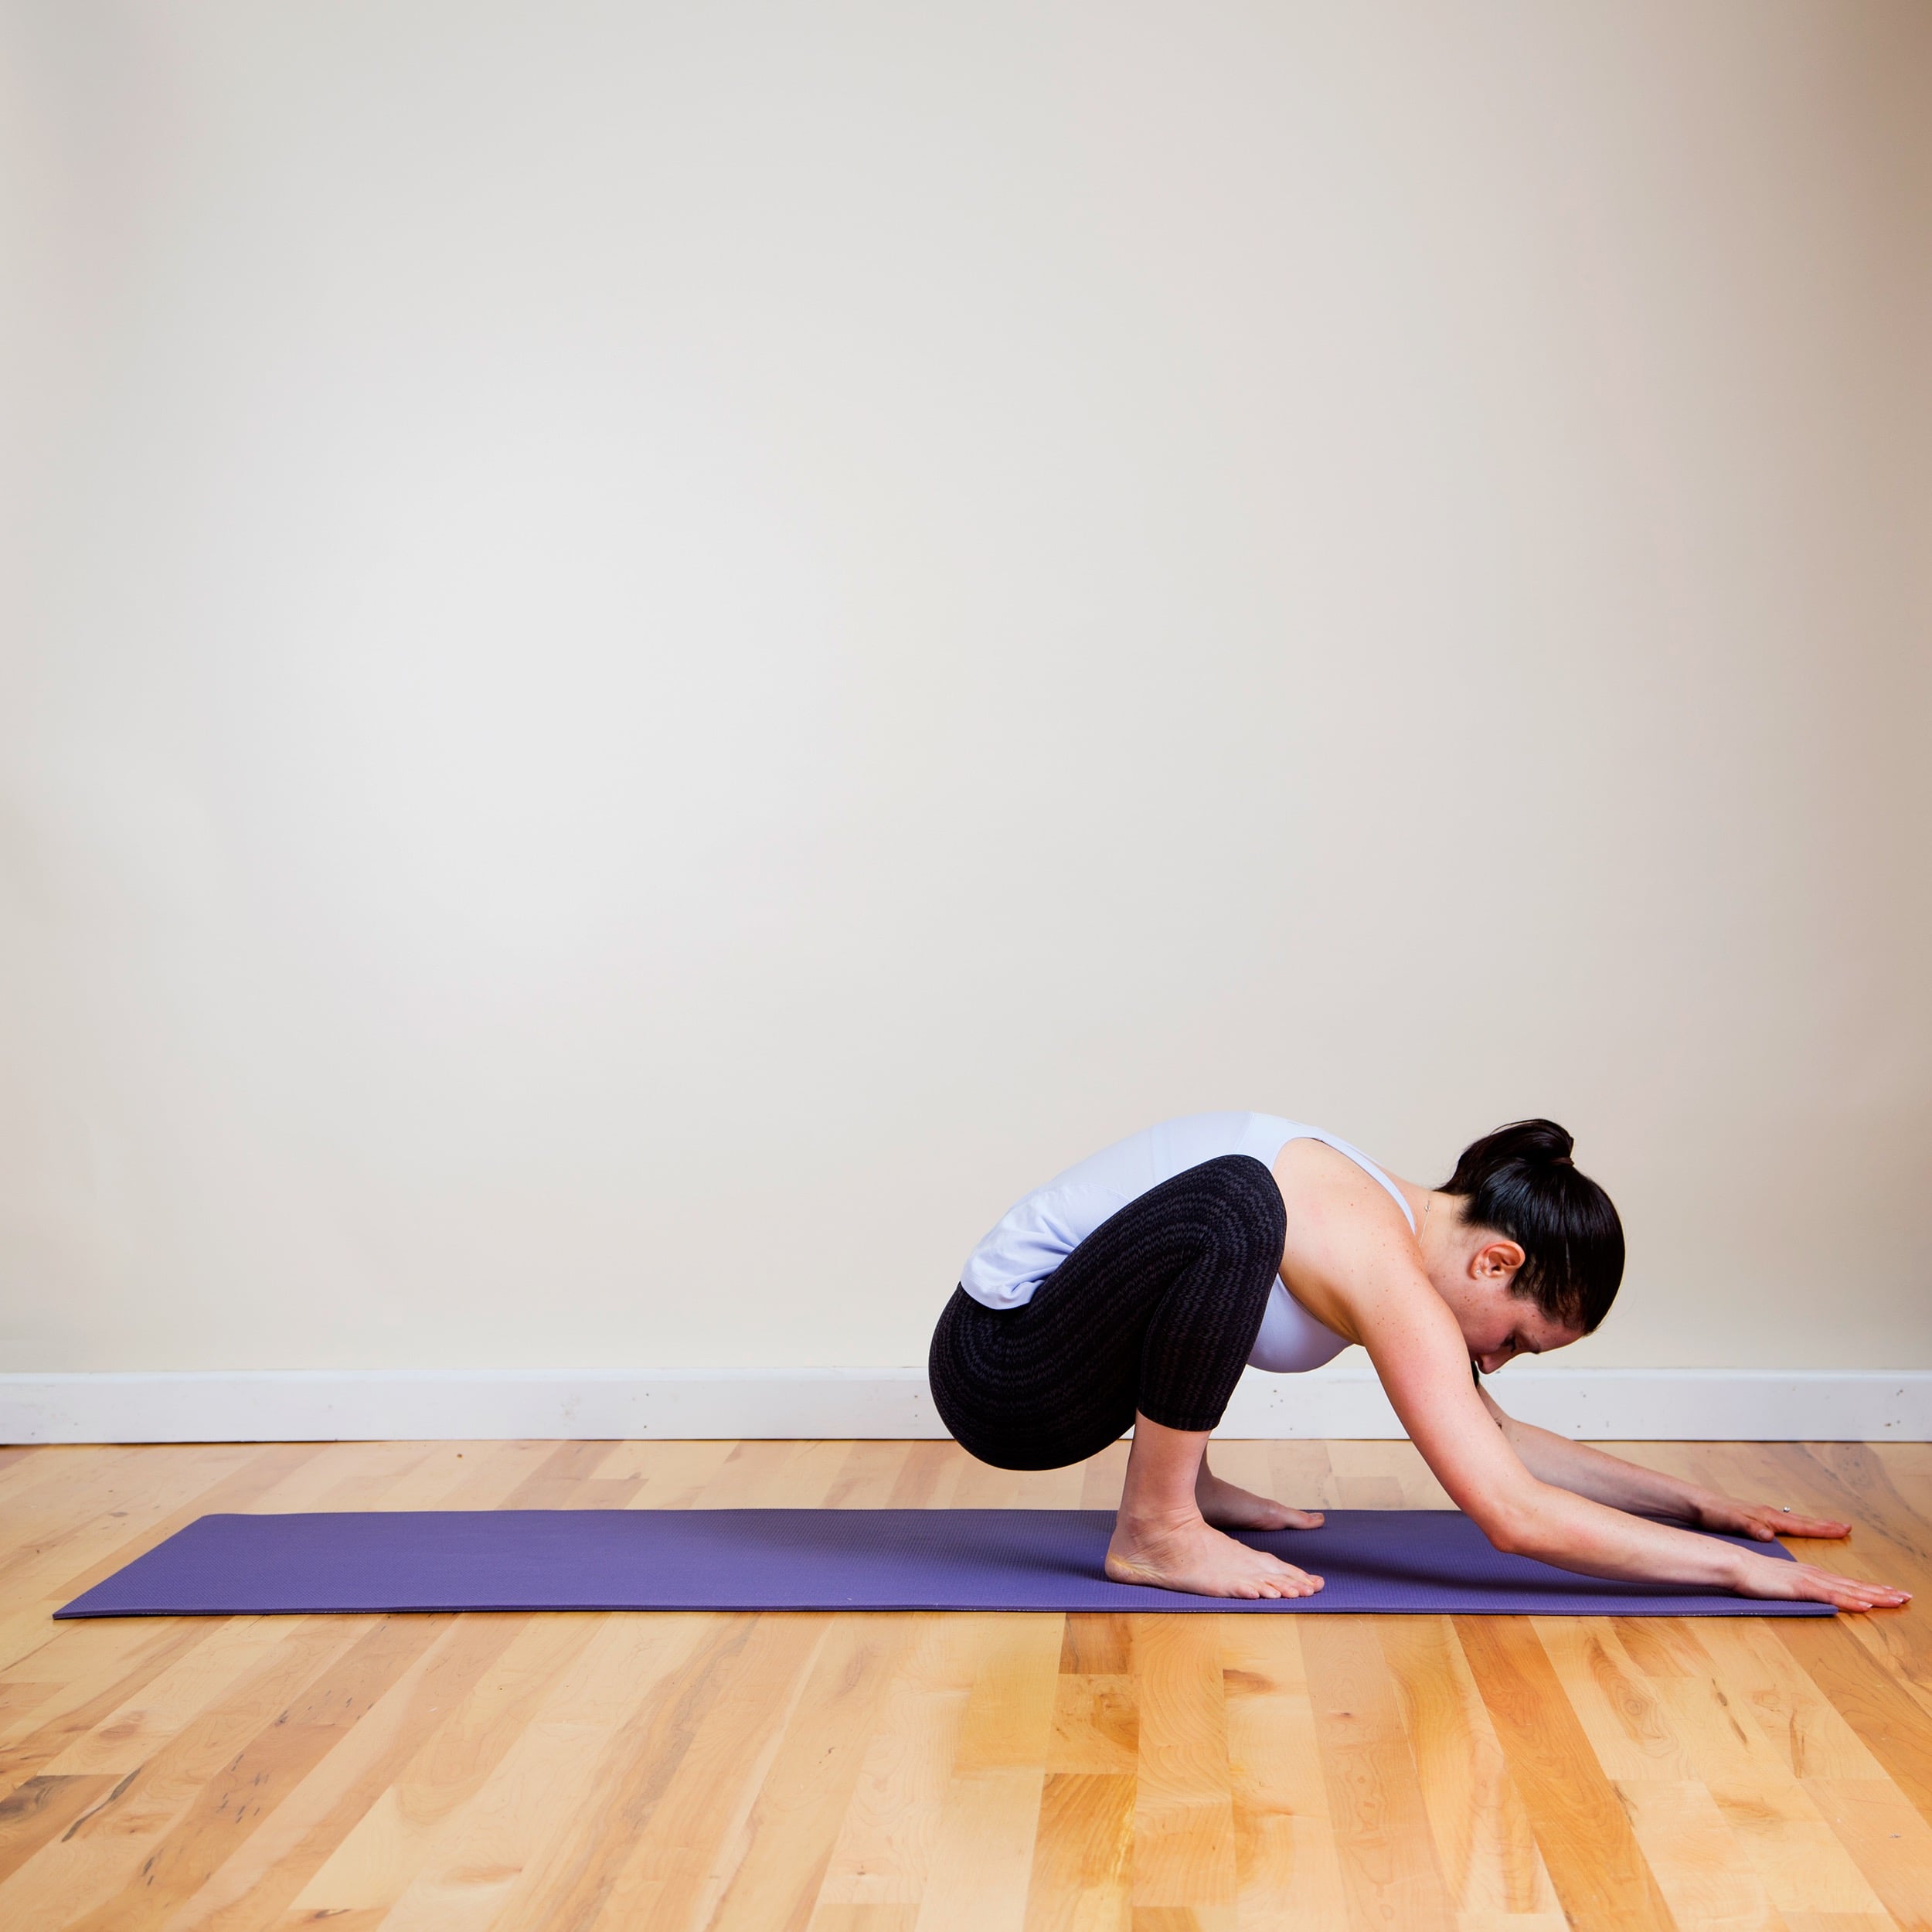 Yoga Poses and Stretches to Help Gas, Digestion and Bloating